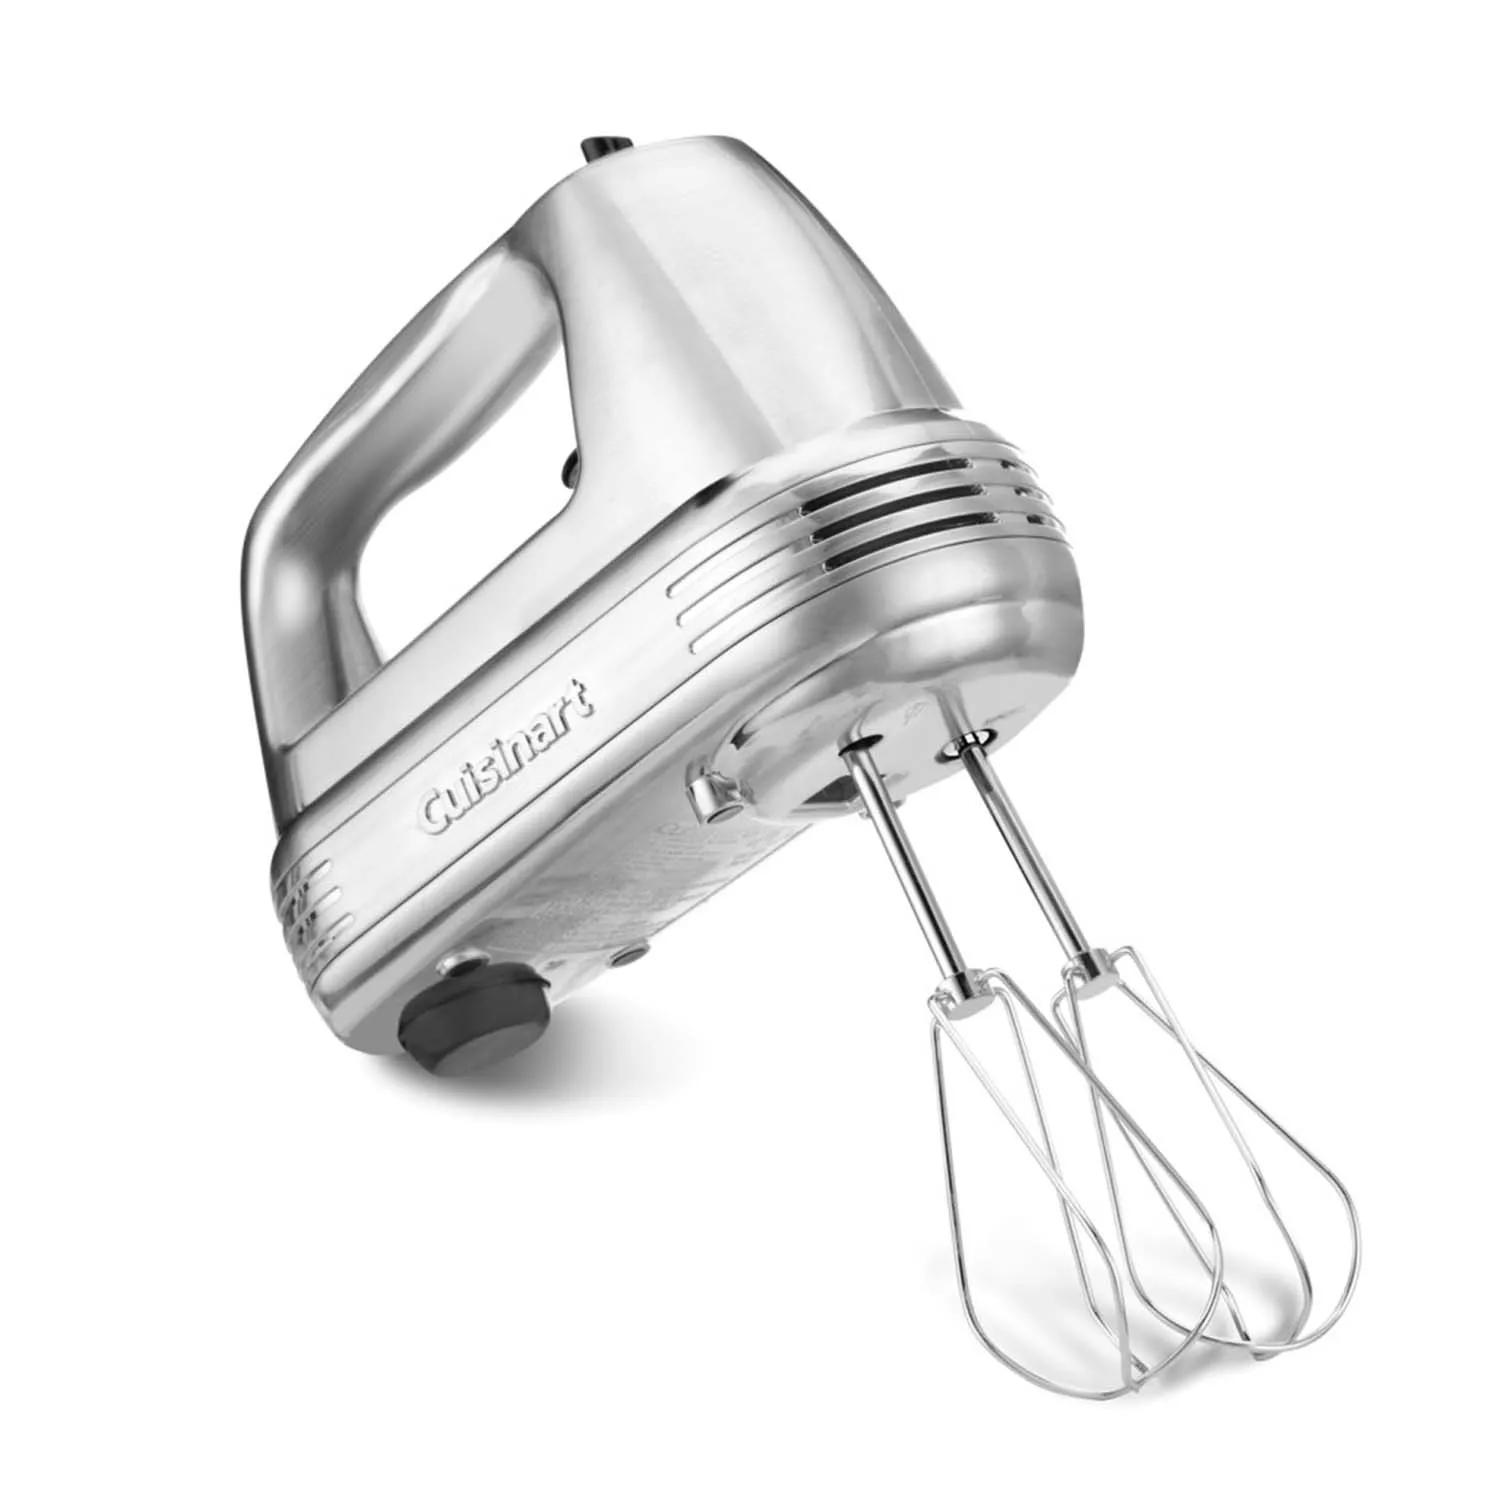 Power Advantage® Deluxe 8-Speed Hand Mixer with Blending